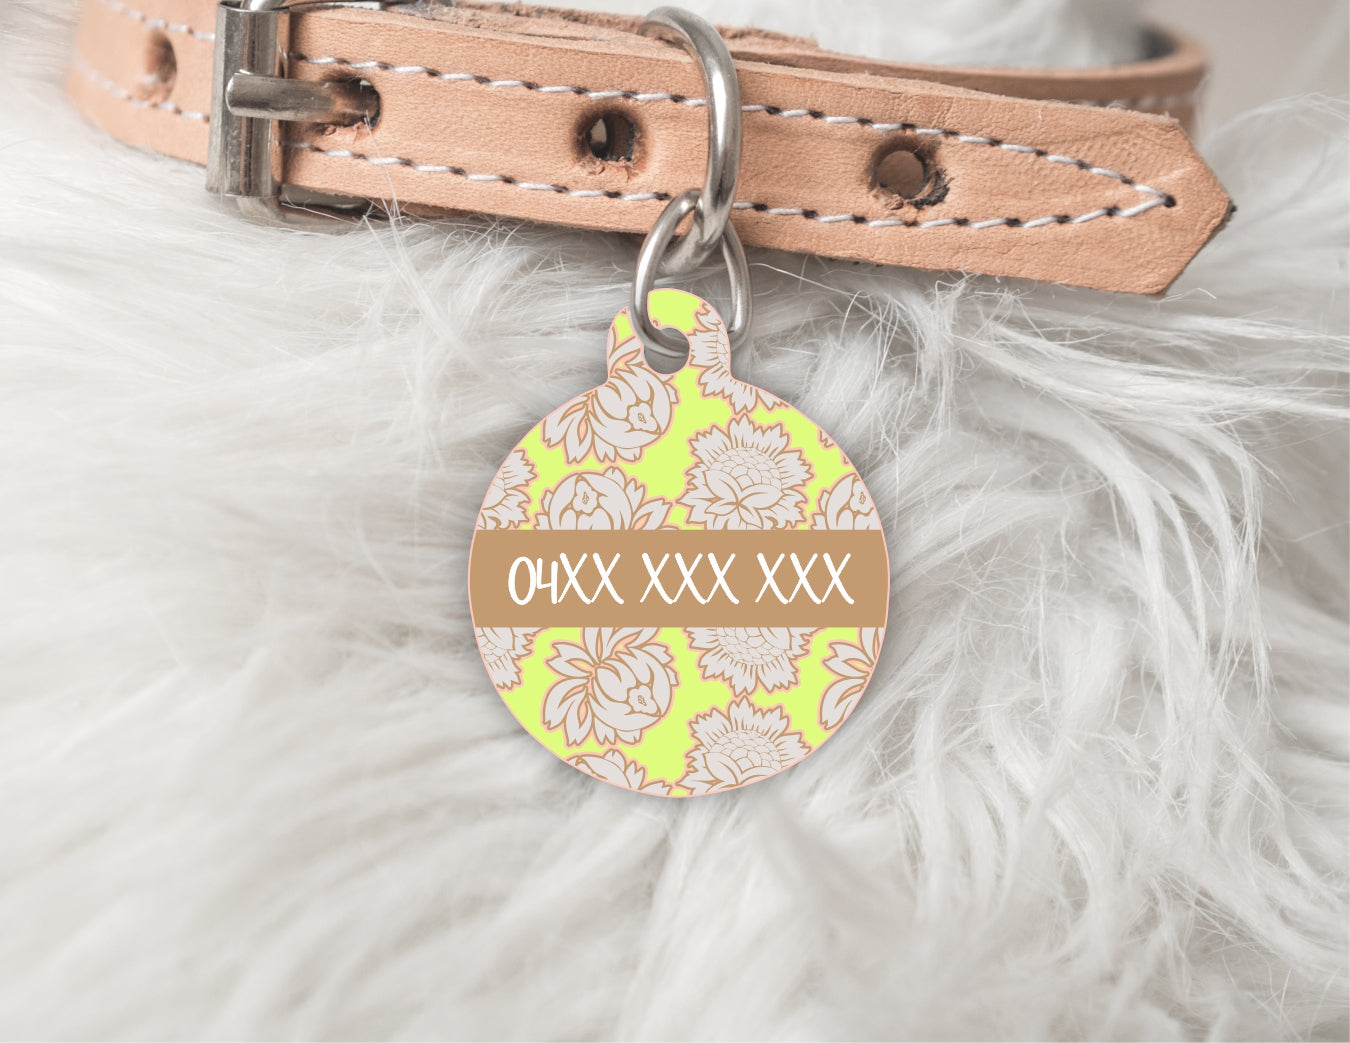 Pup island - Summer Personalised Pet dog or cat ID Tag - Bronte